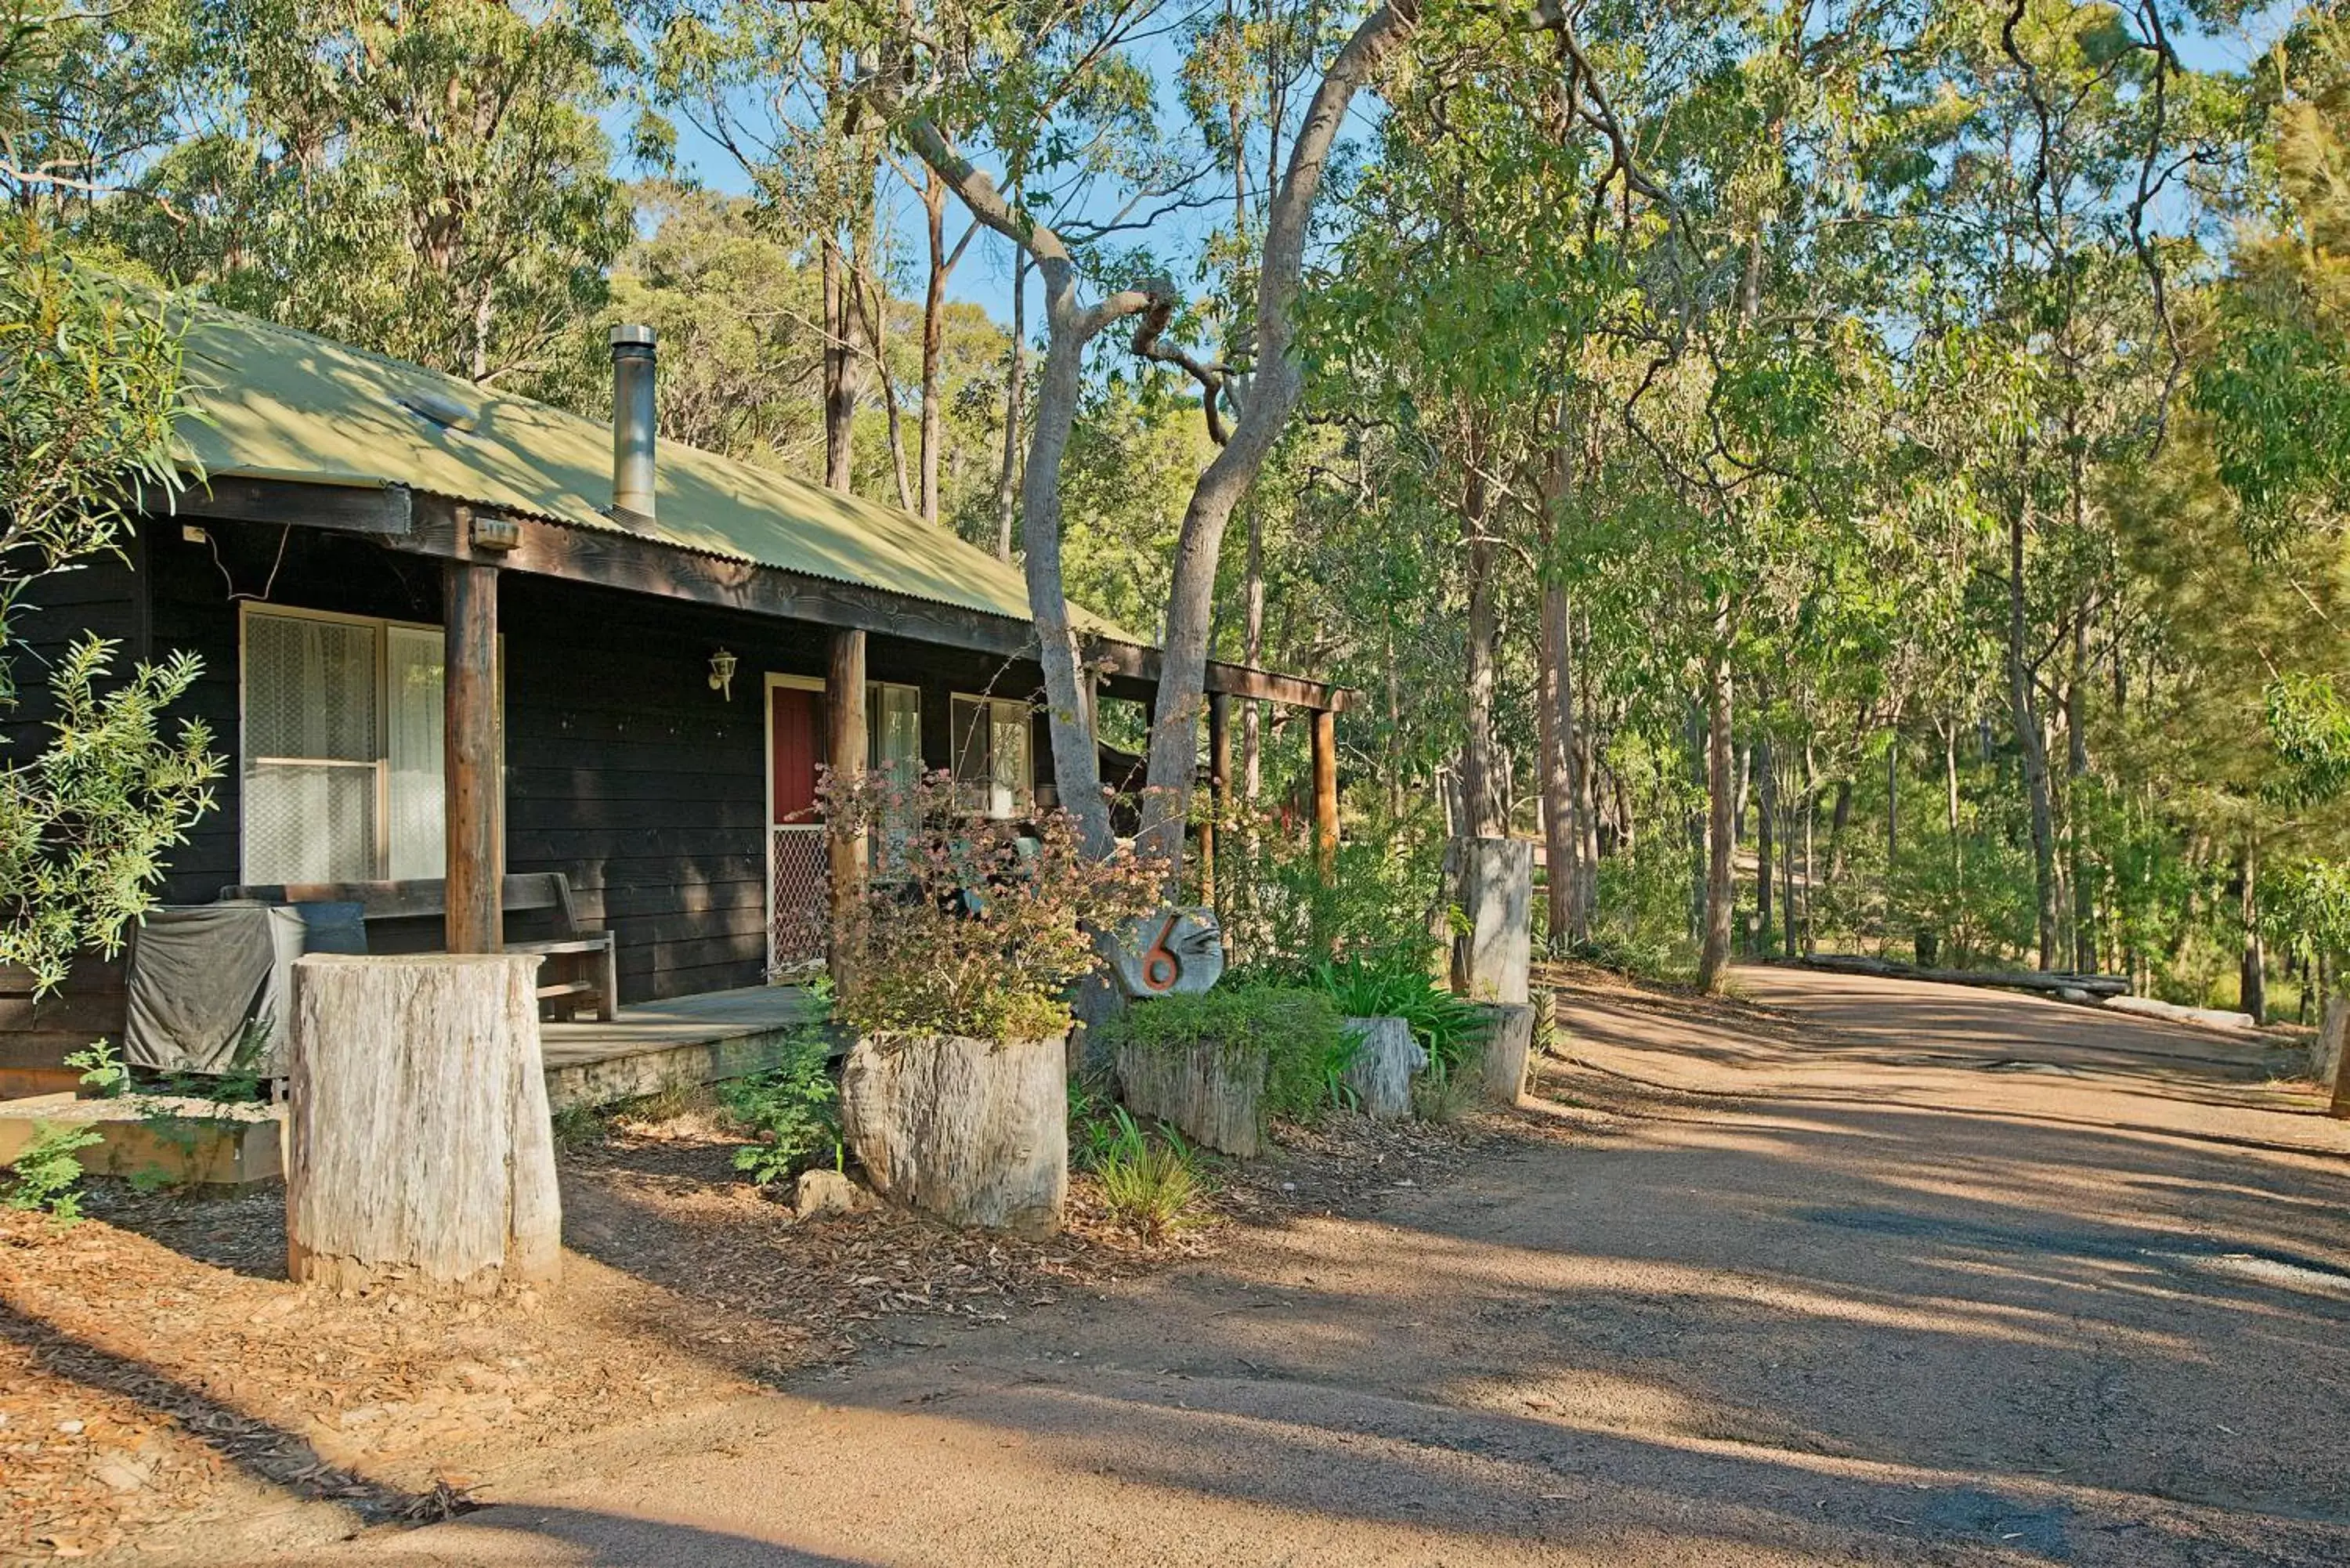 Property building in Kianinny Bush Cottages